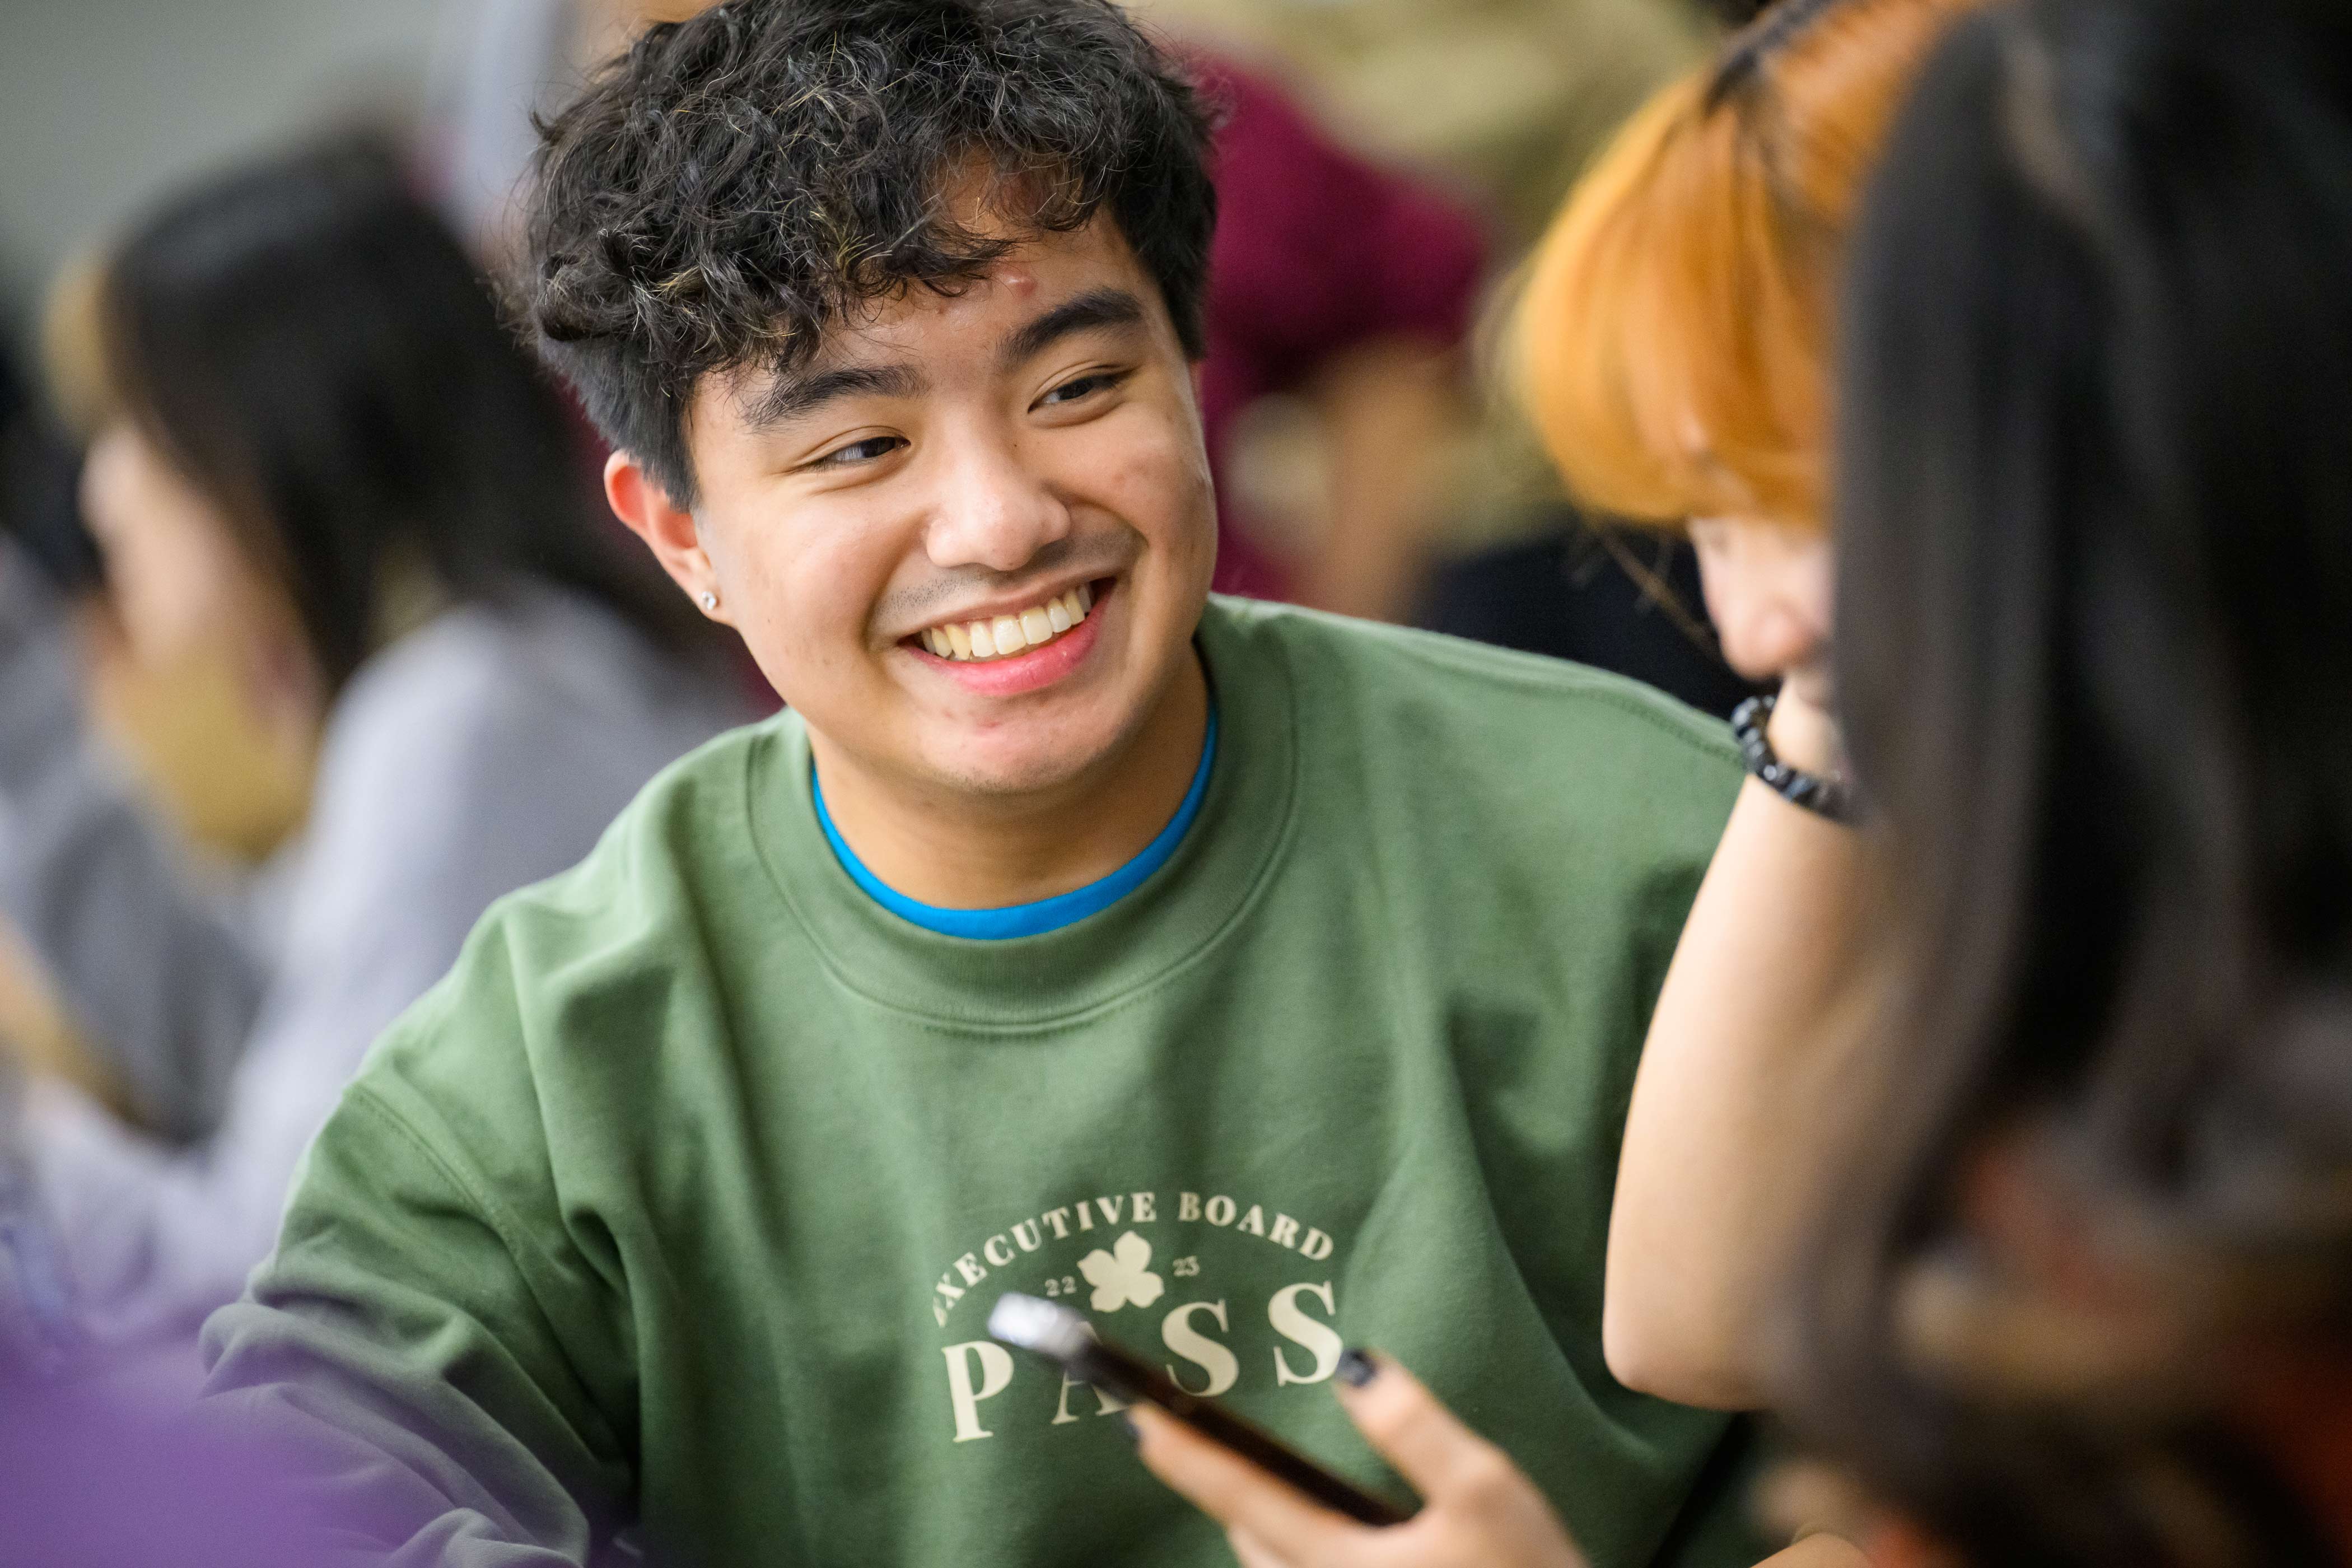 Student smiling in a group conversation